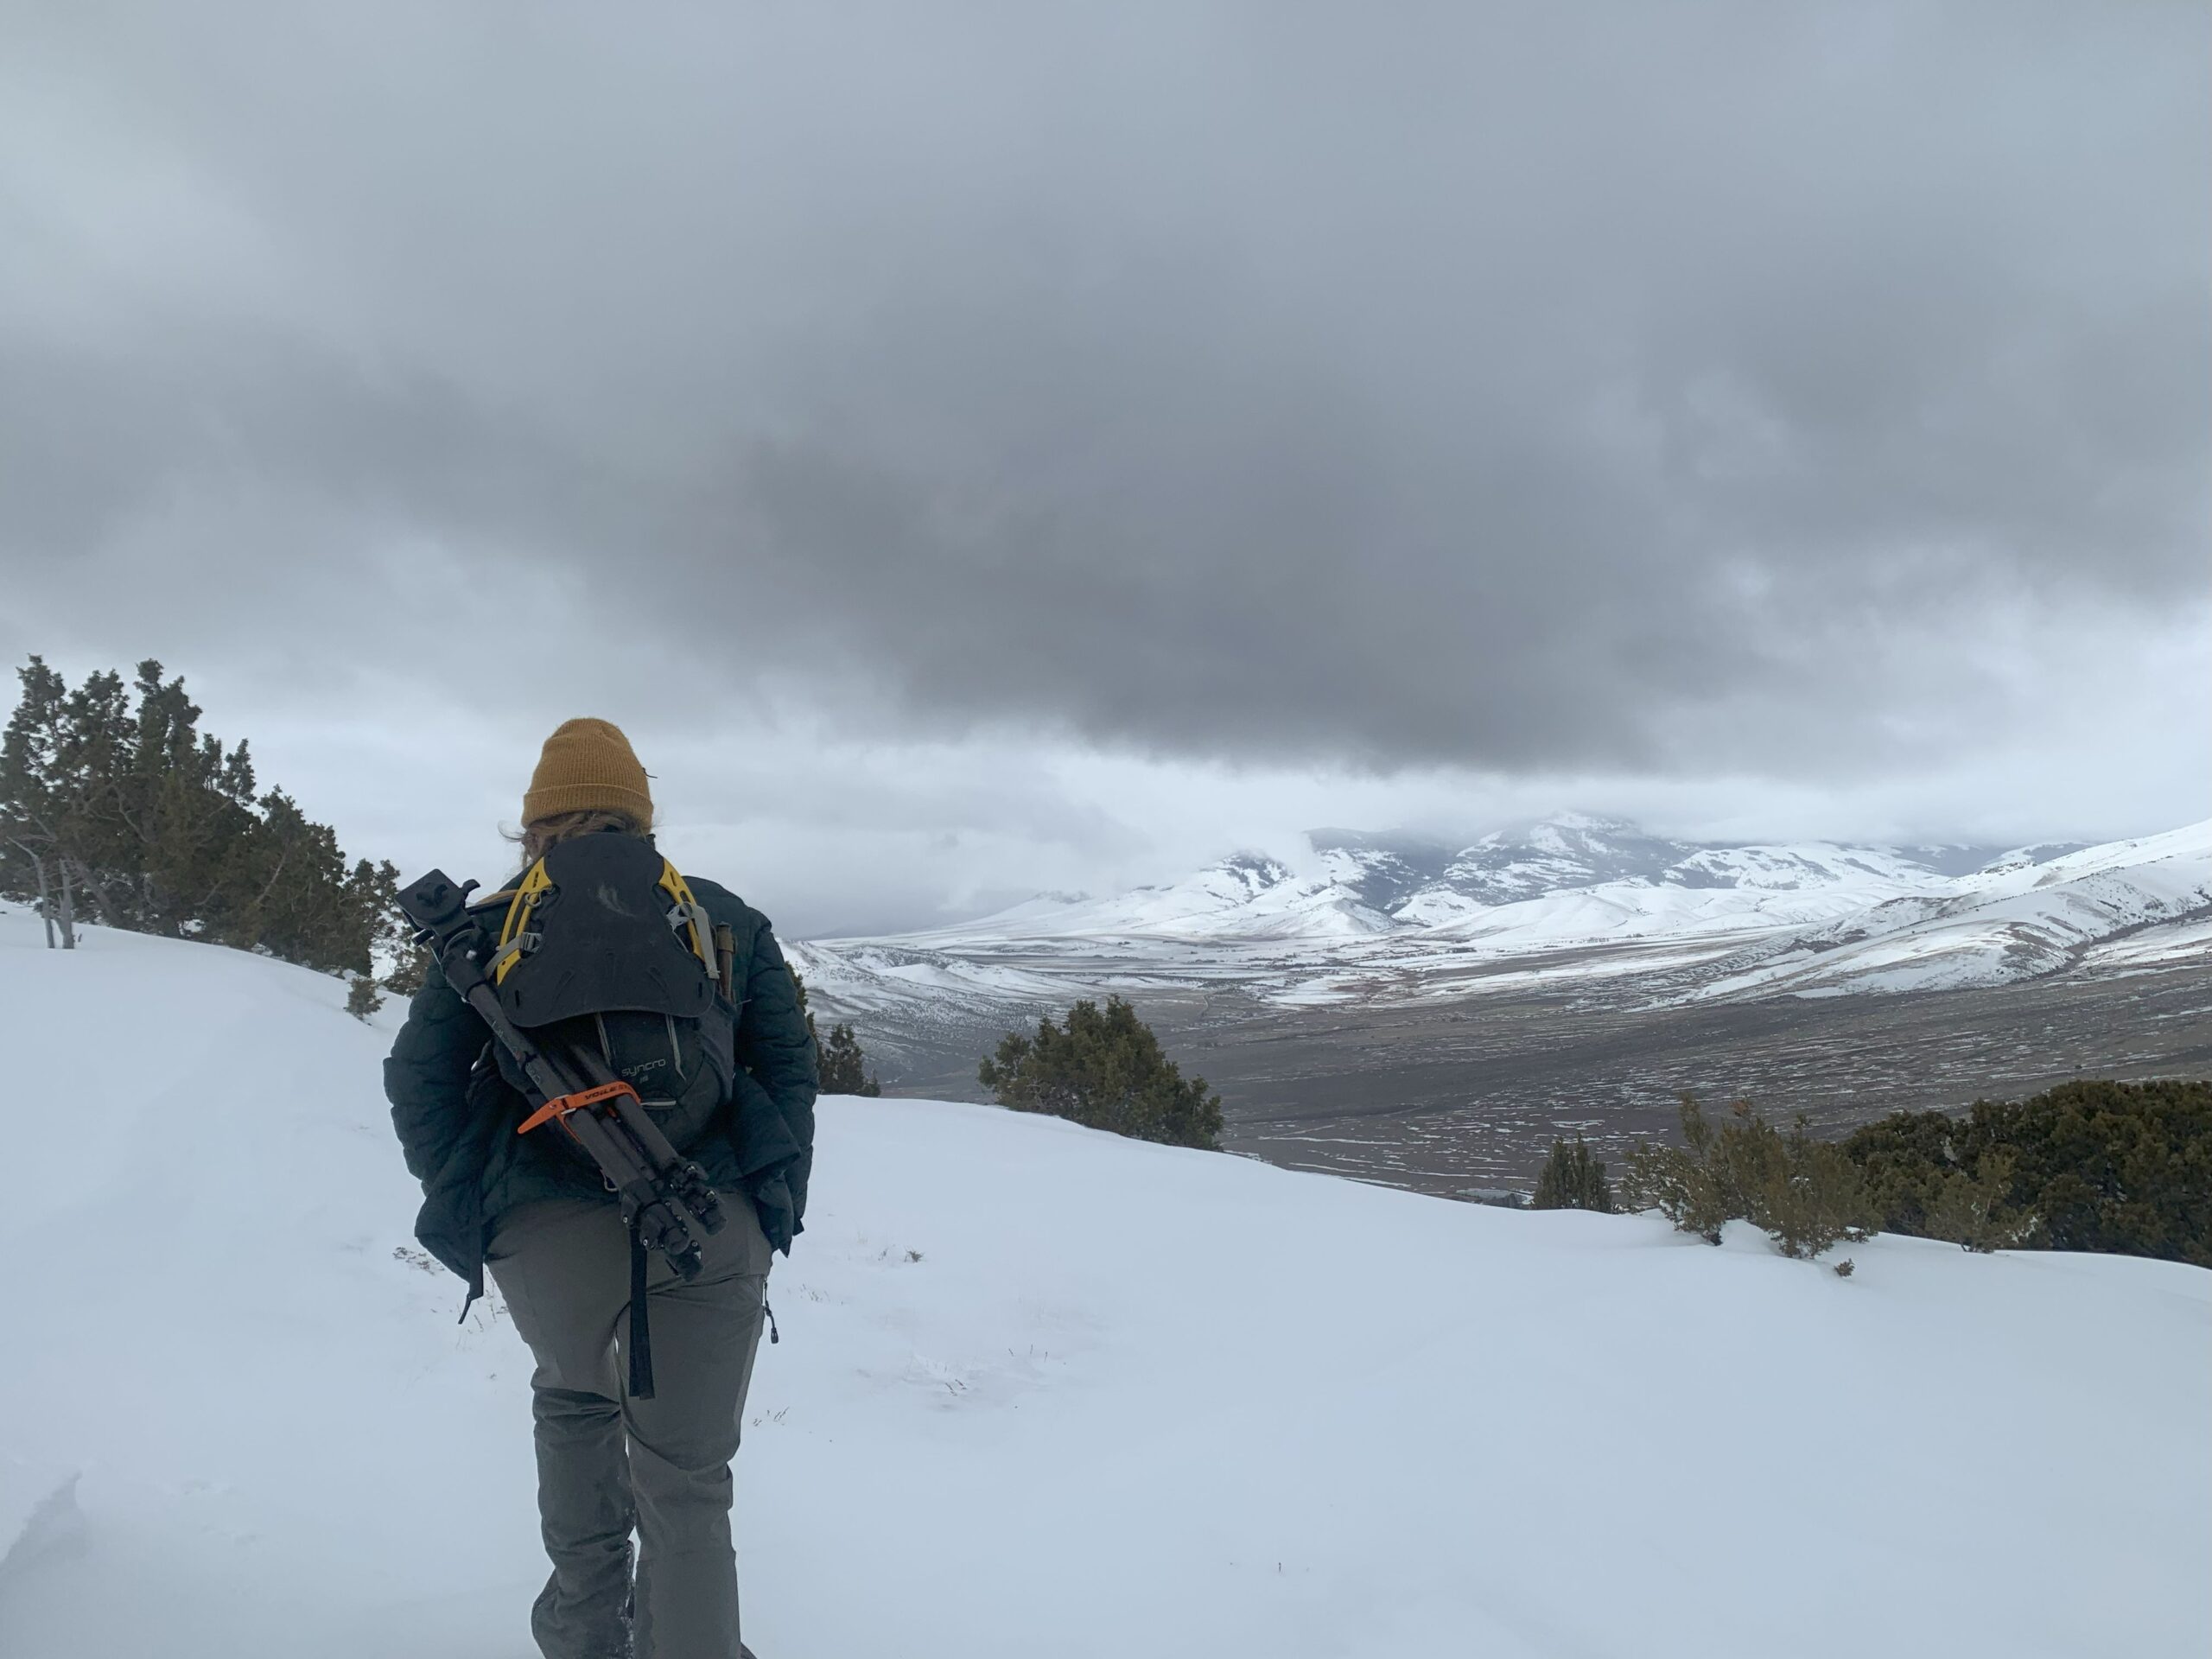 A biologist bundled up in winter gear hikes through deep snow. Green conifer trees and white snow-covered mountains are in the distance